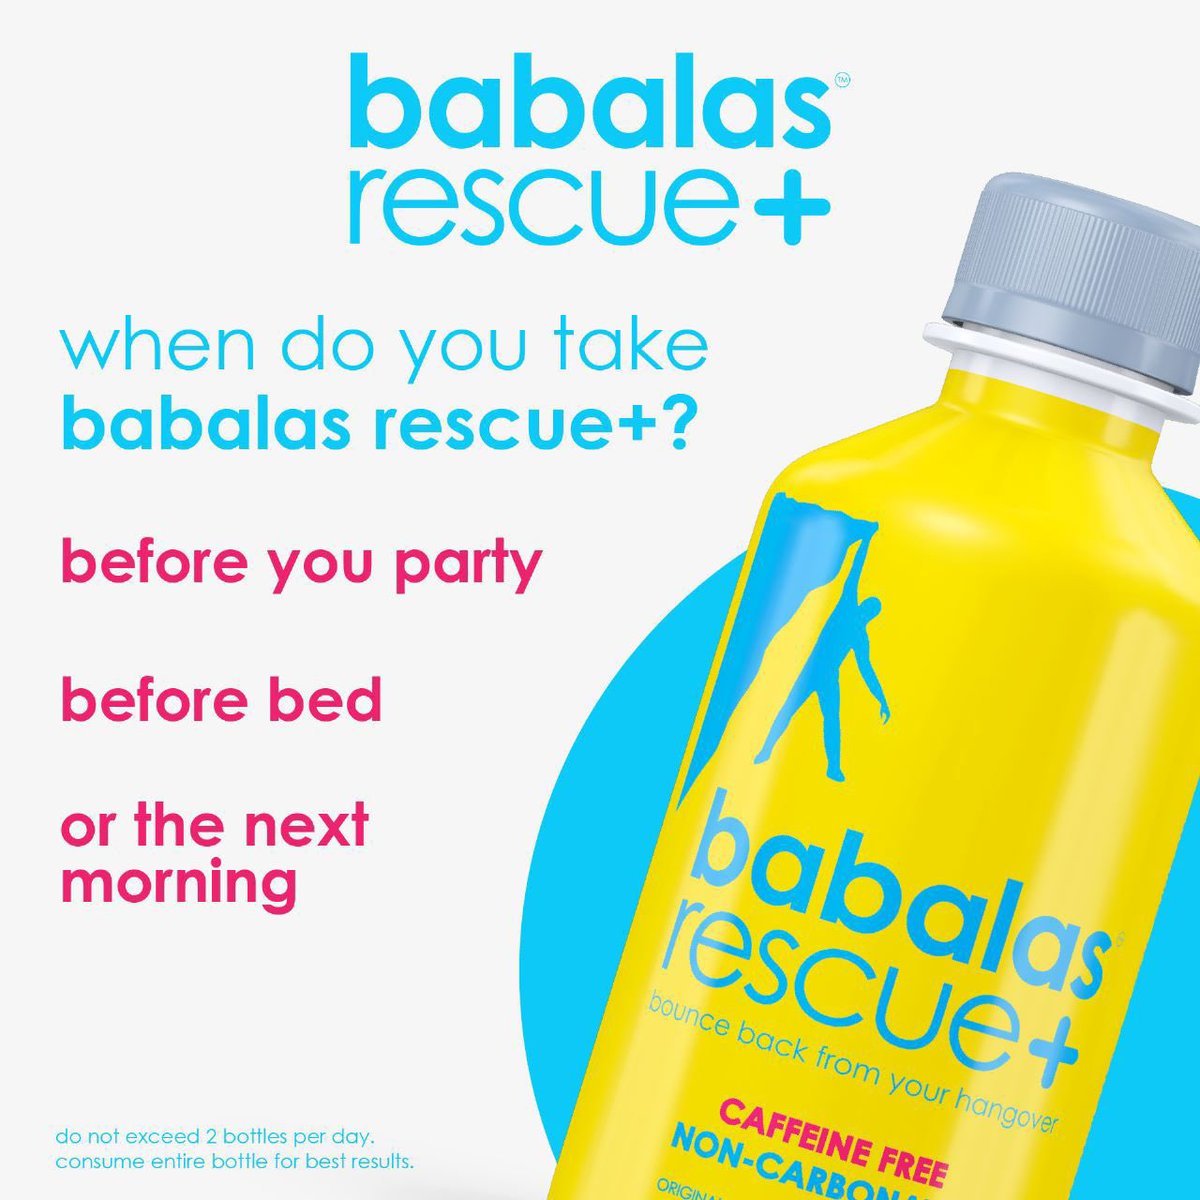 Unsure when or how to take Babalas Rescue+? Here is your guide for optimal results 😉

#rescueplus #babalasrescue #hangoverfree